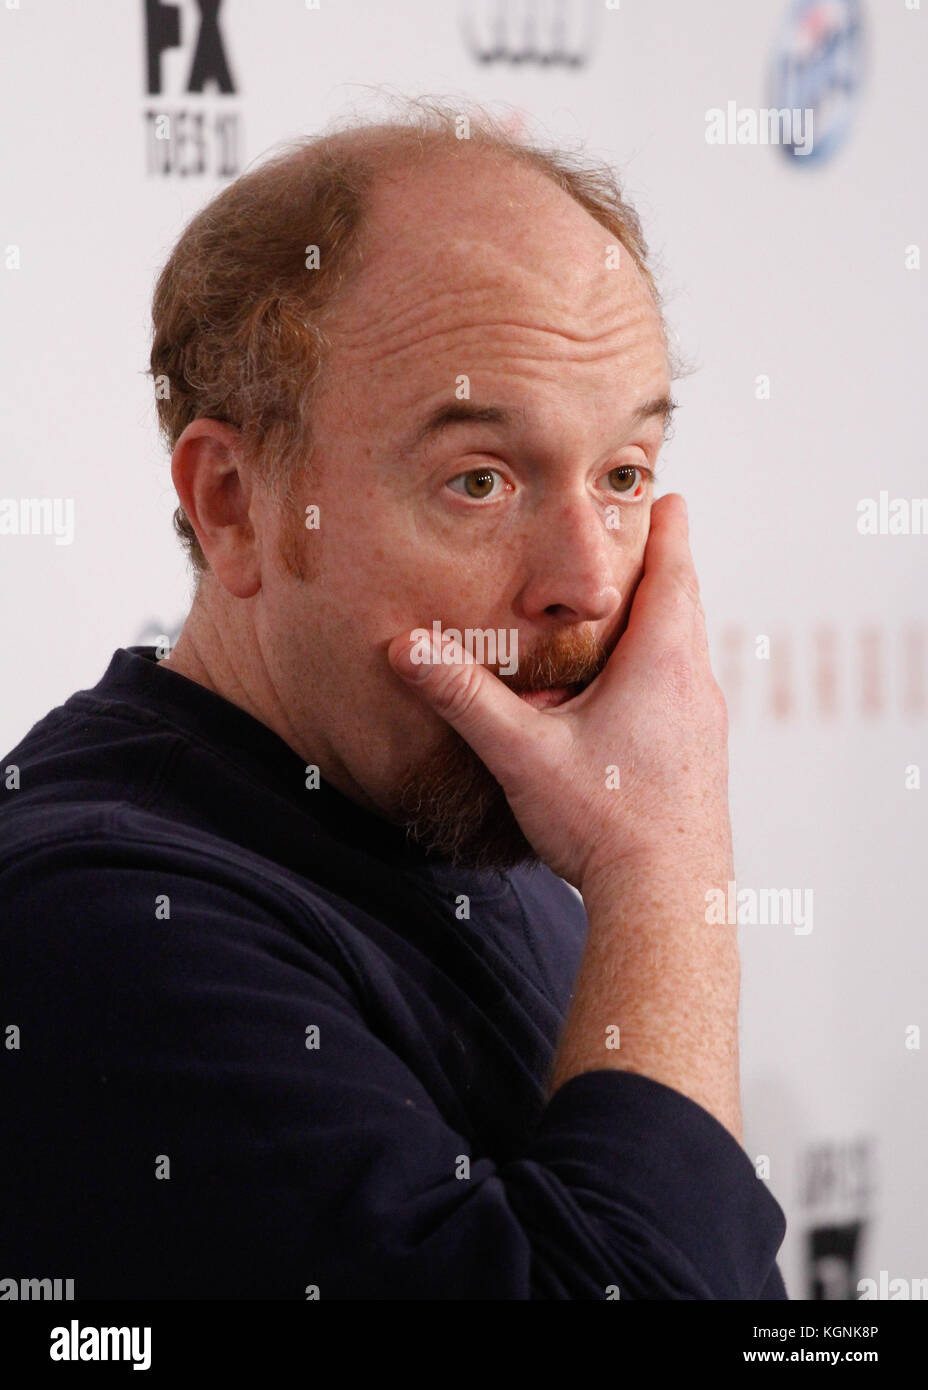 New York, USA. 29th Mar, 2012. Comedian Louis C.K. attends the FX Networks Upfront screening of 'Fargo' at SVA Theater on April 9, 2014 in New York City. credit: Erik Pendzich Credit: Erik Pendzich/Alamy Live News Stock Photo